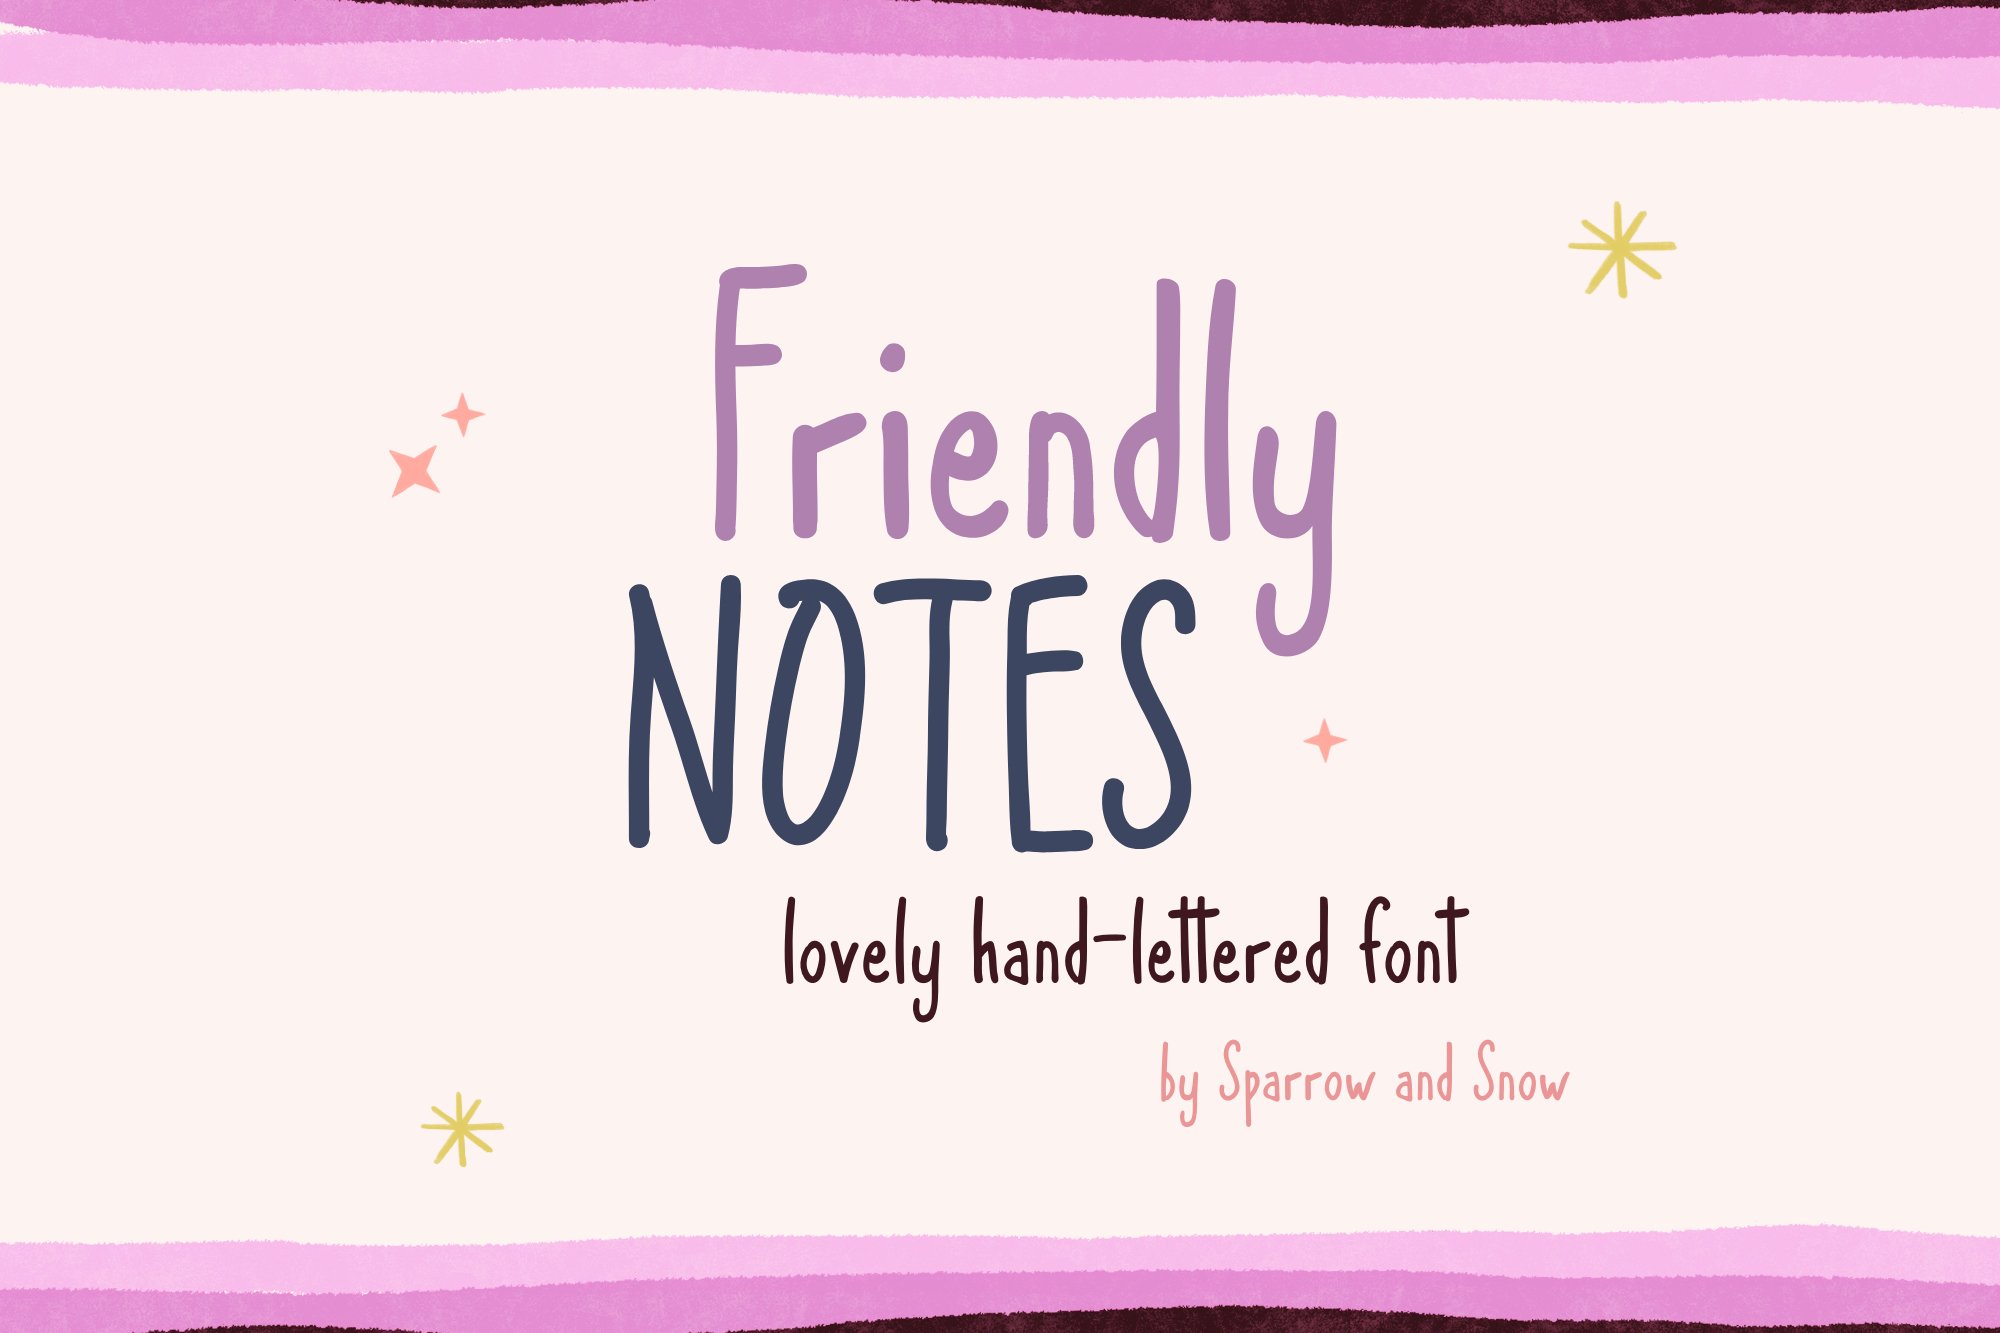 Friendly Notes Handwritten Font cover image.